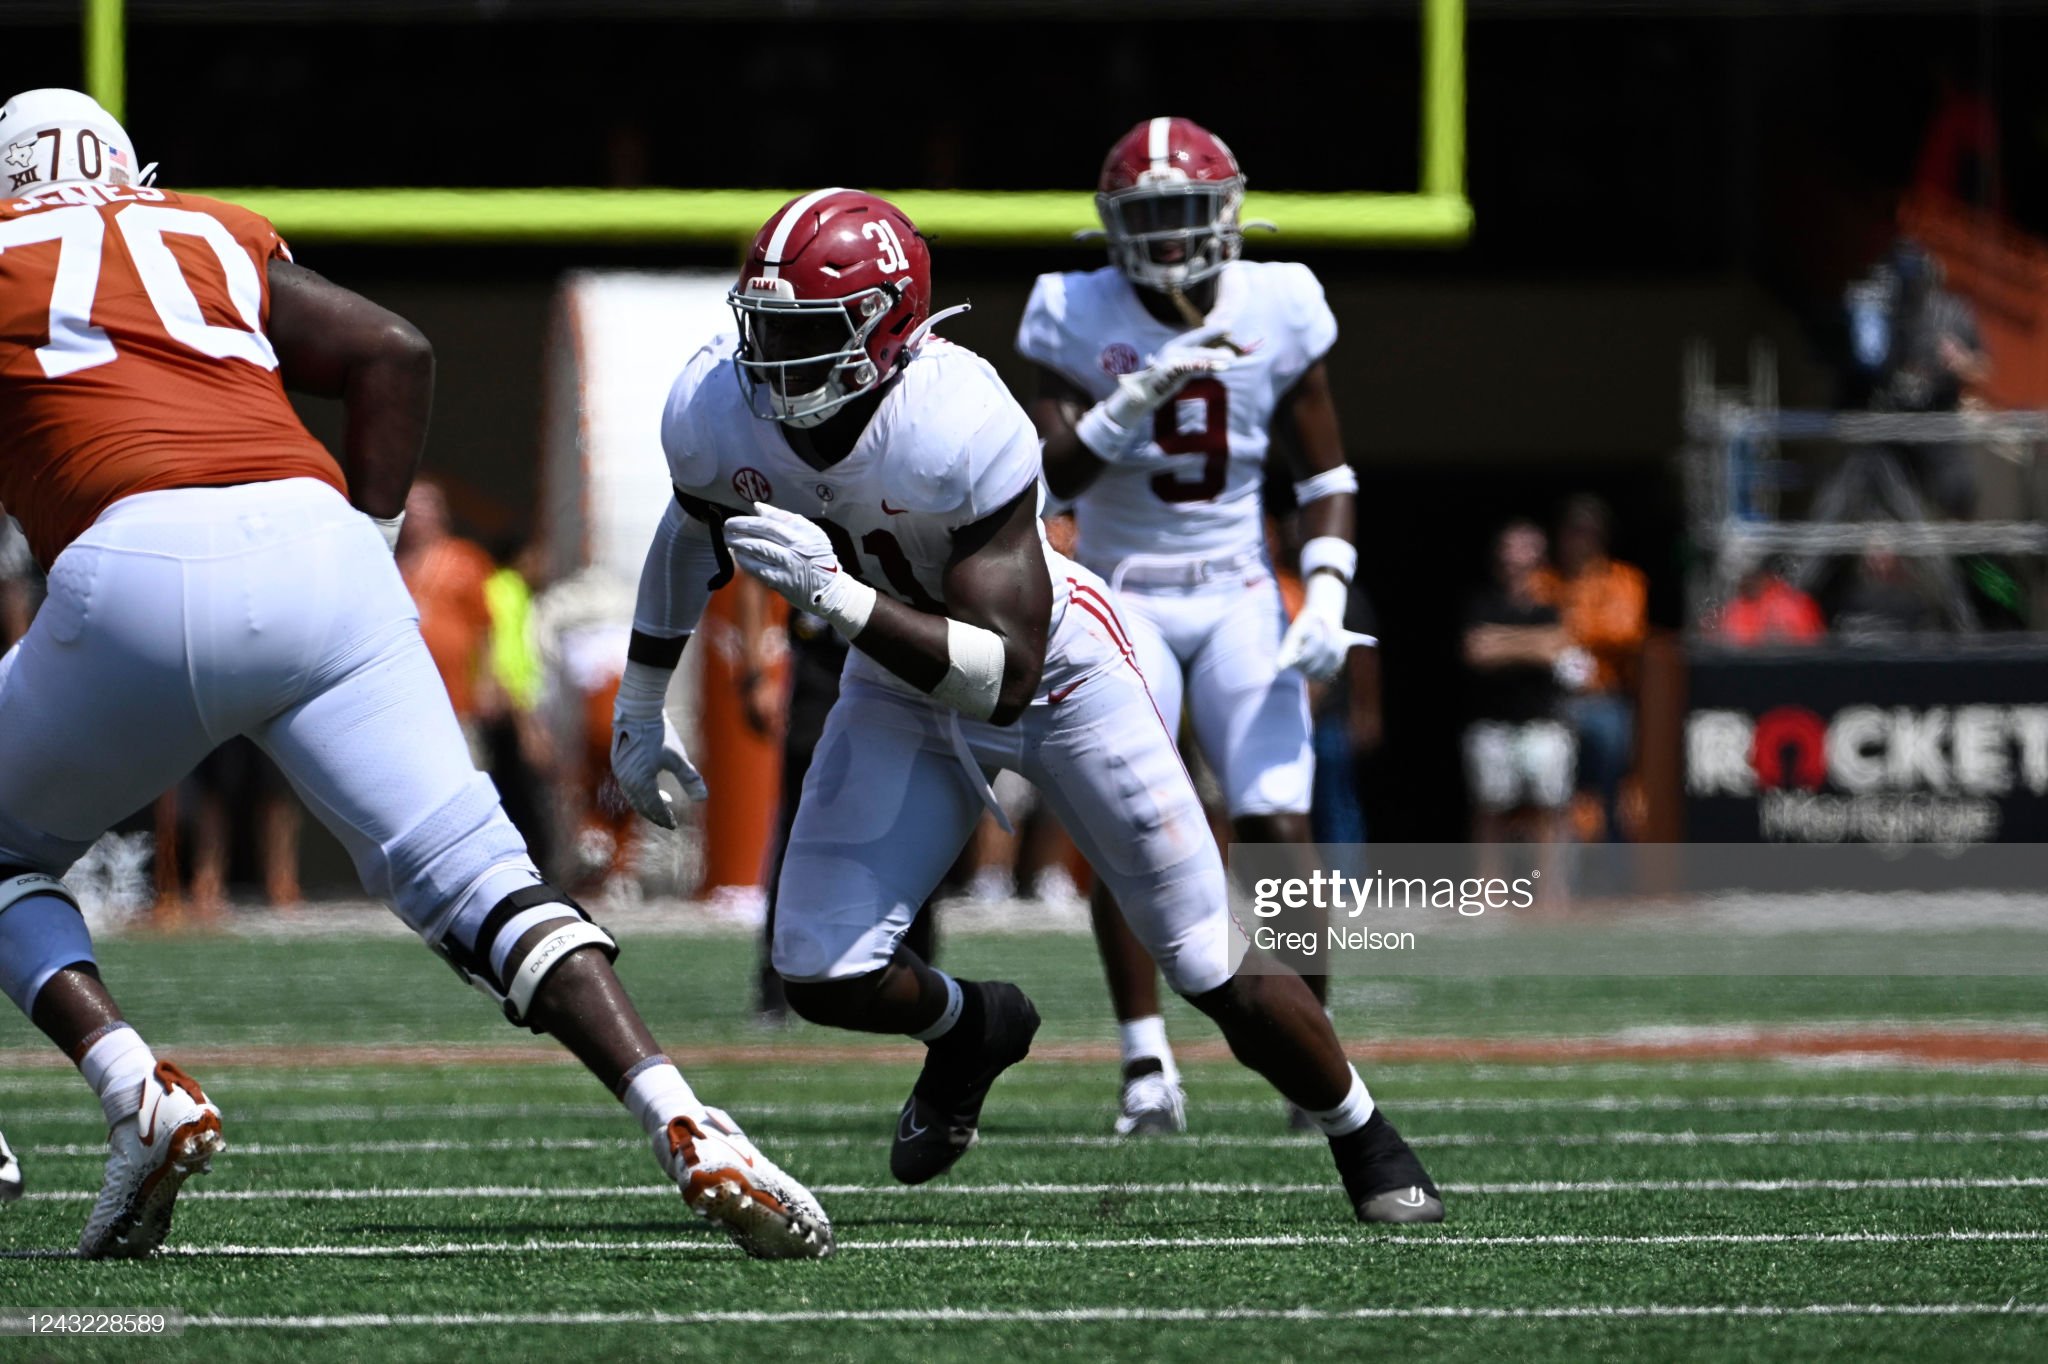 2023 NFL Draft Scouting Reports: EDGE Will Anderson Jr, Alabama